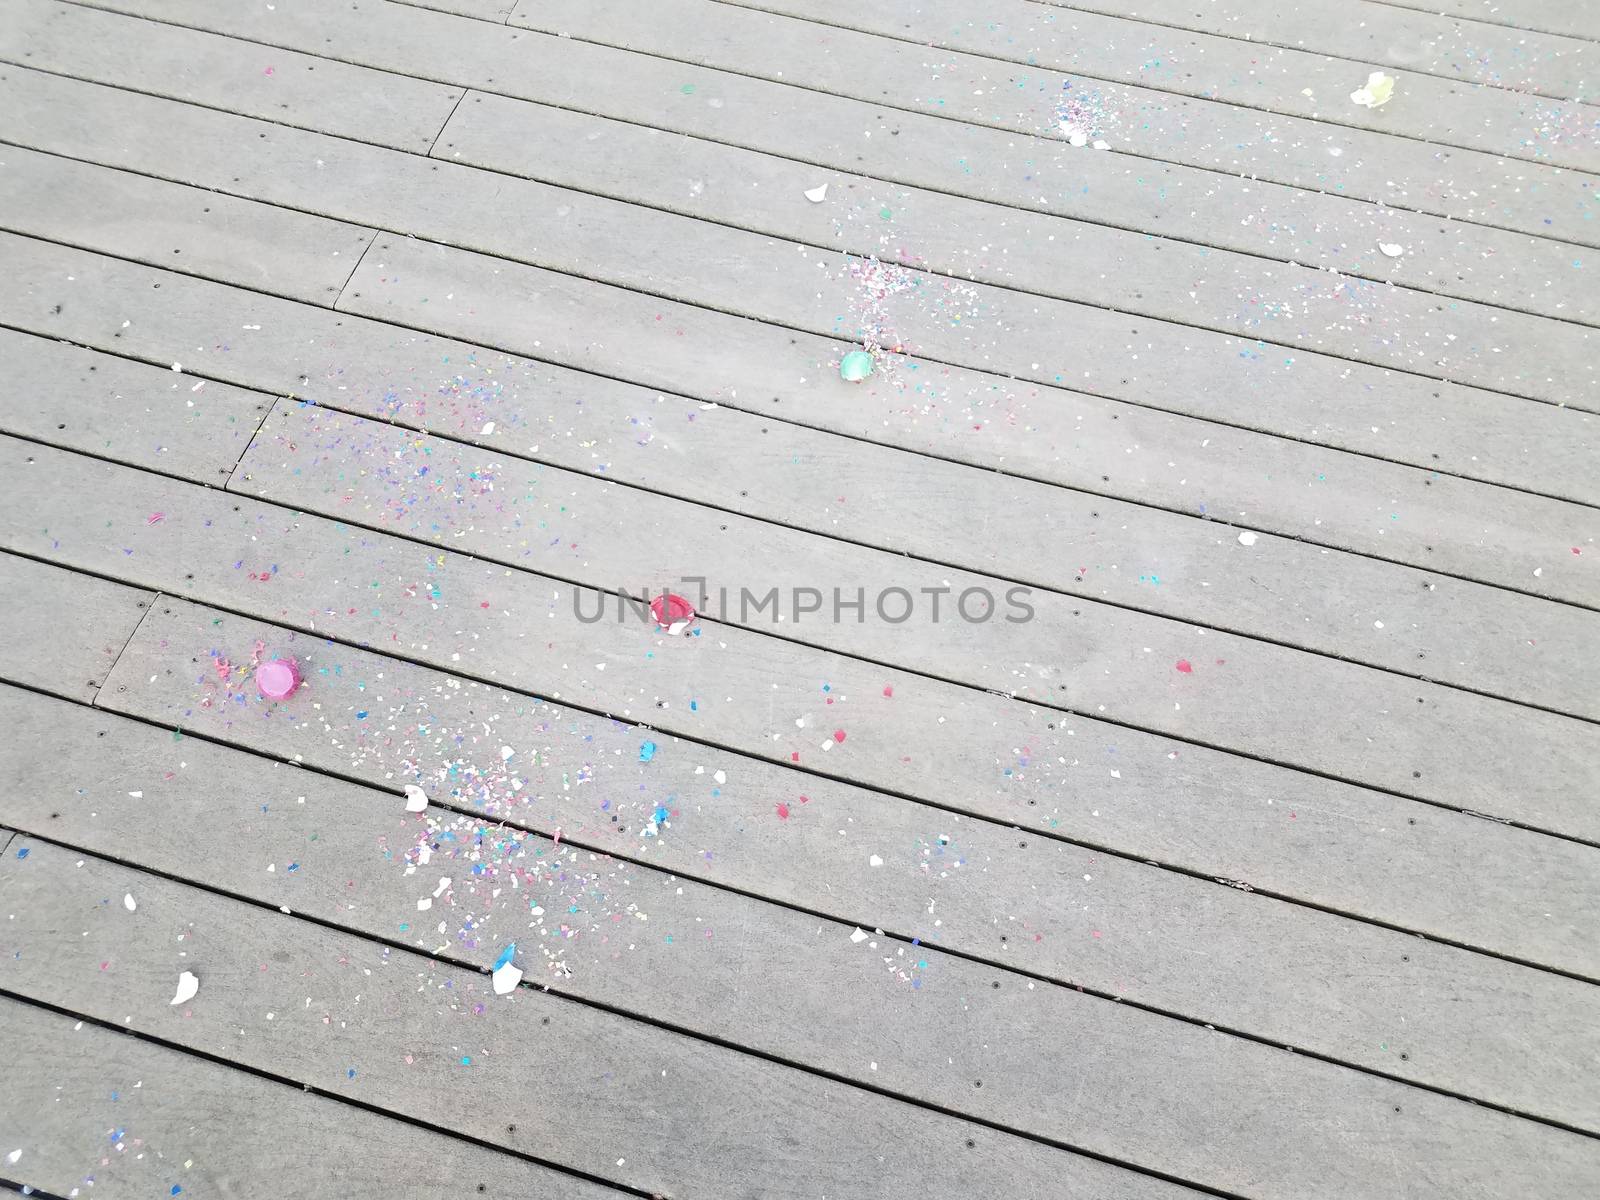 colorful egg shells and paper confetti on wood deck by stockphotofan1